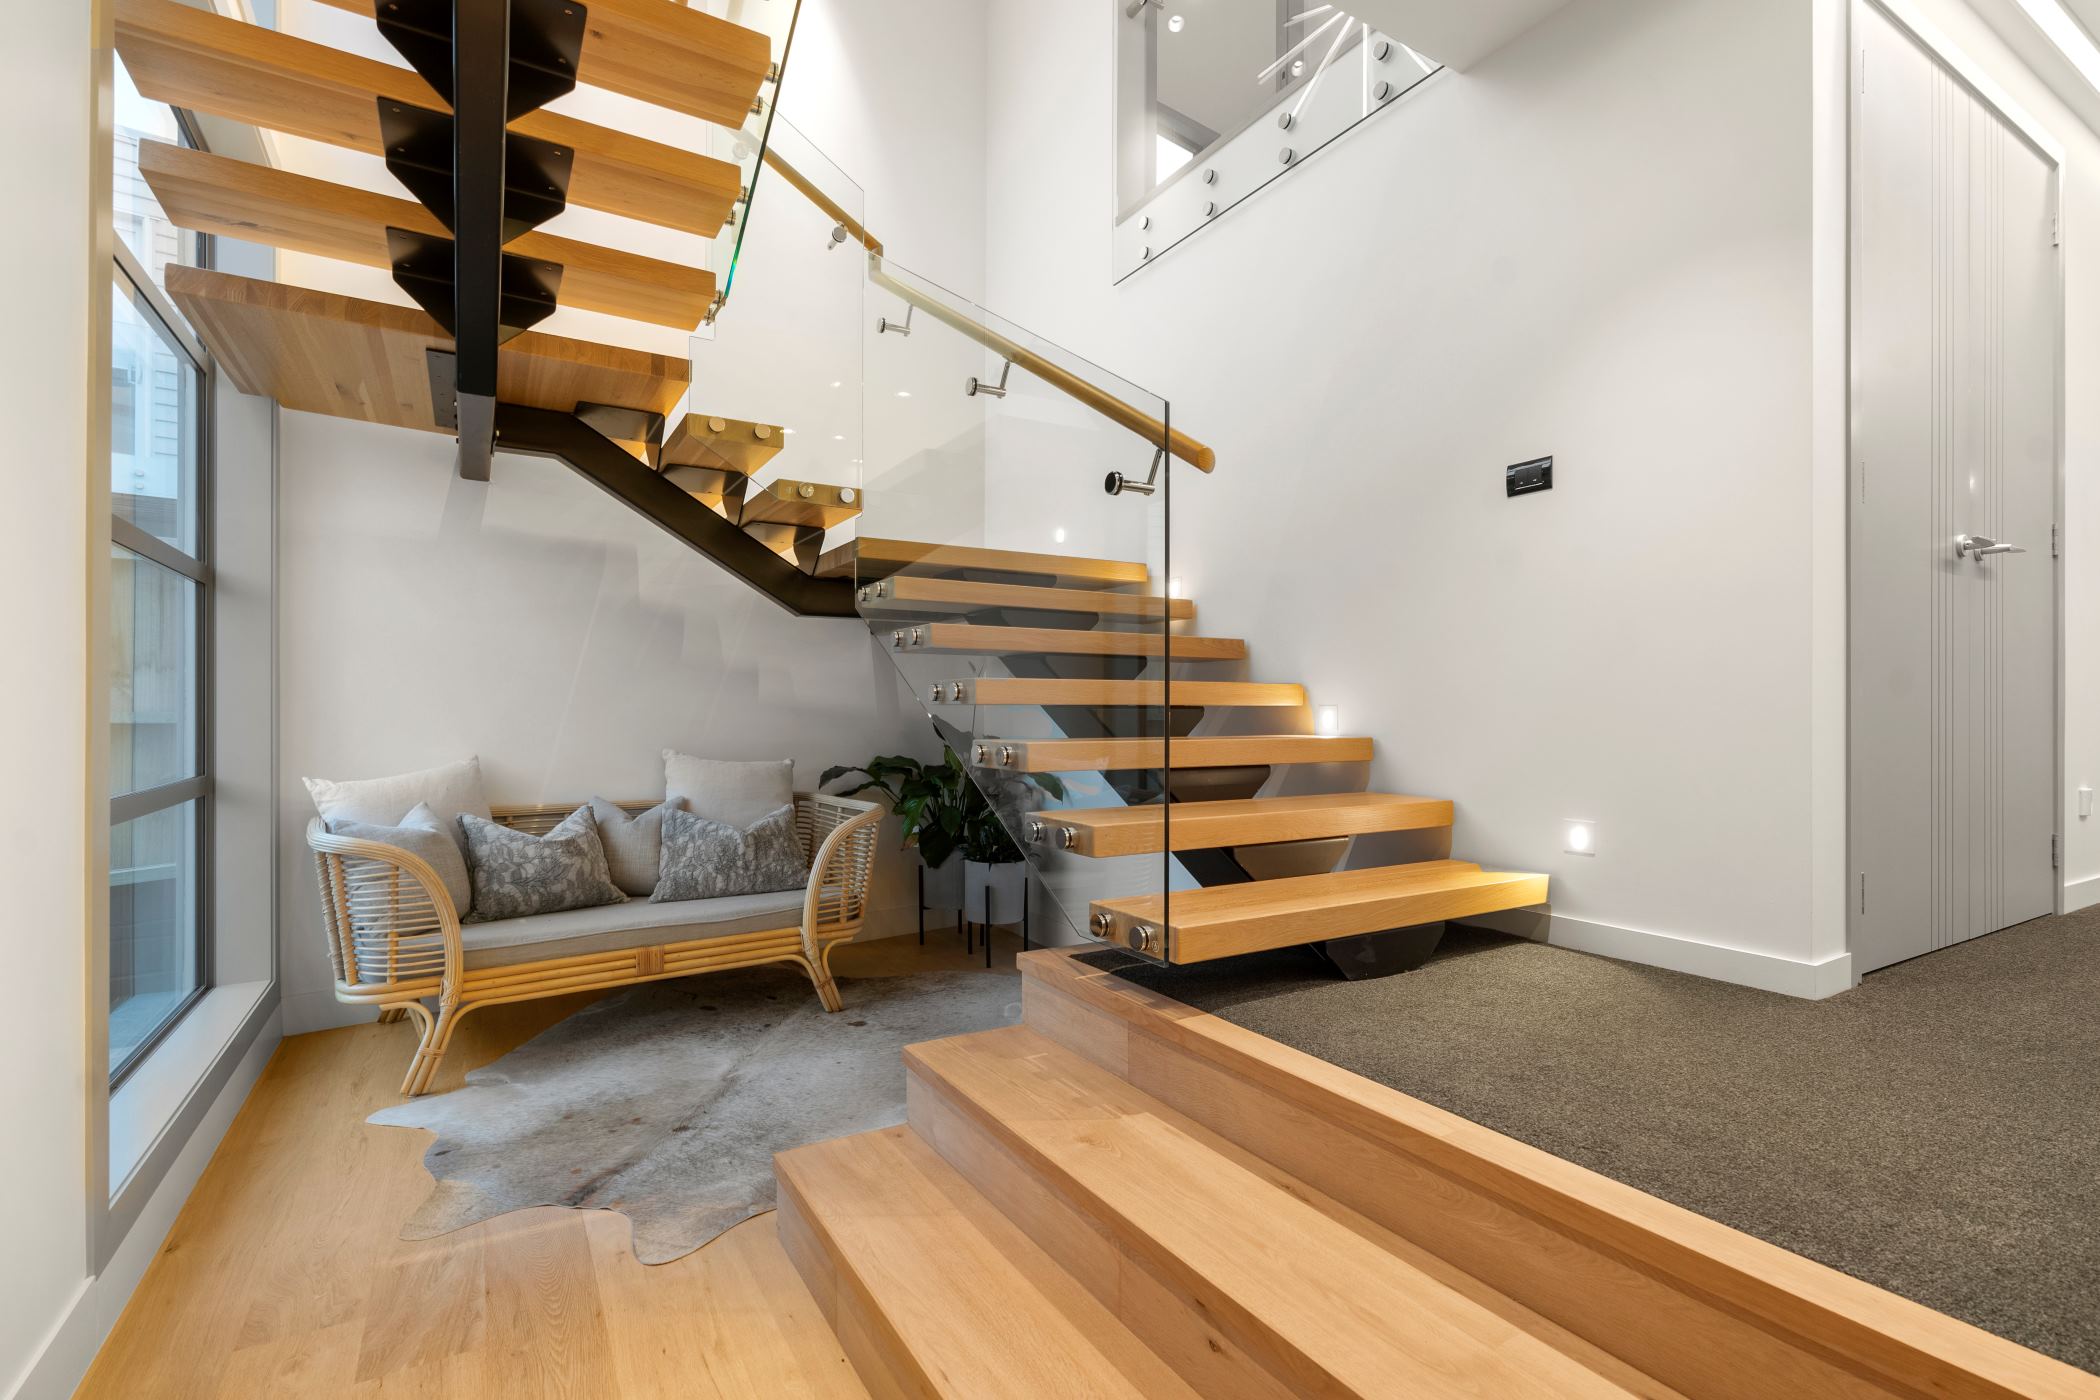 How To Design House Stairs